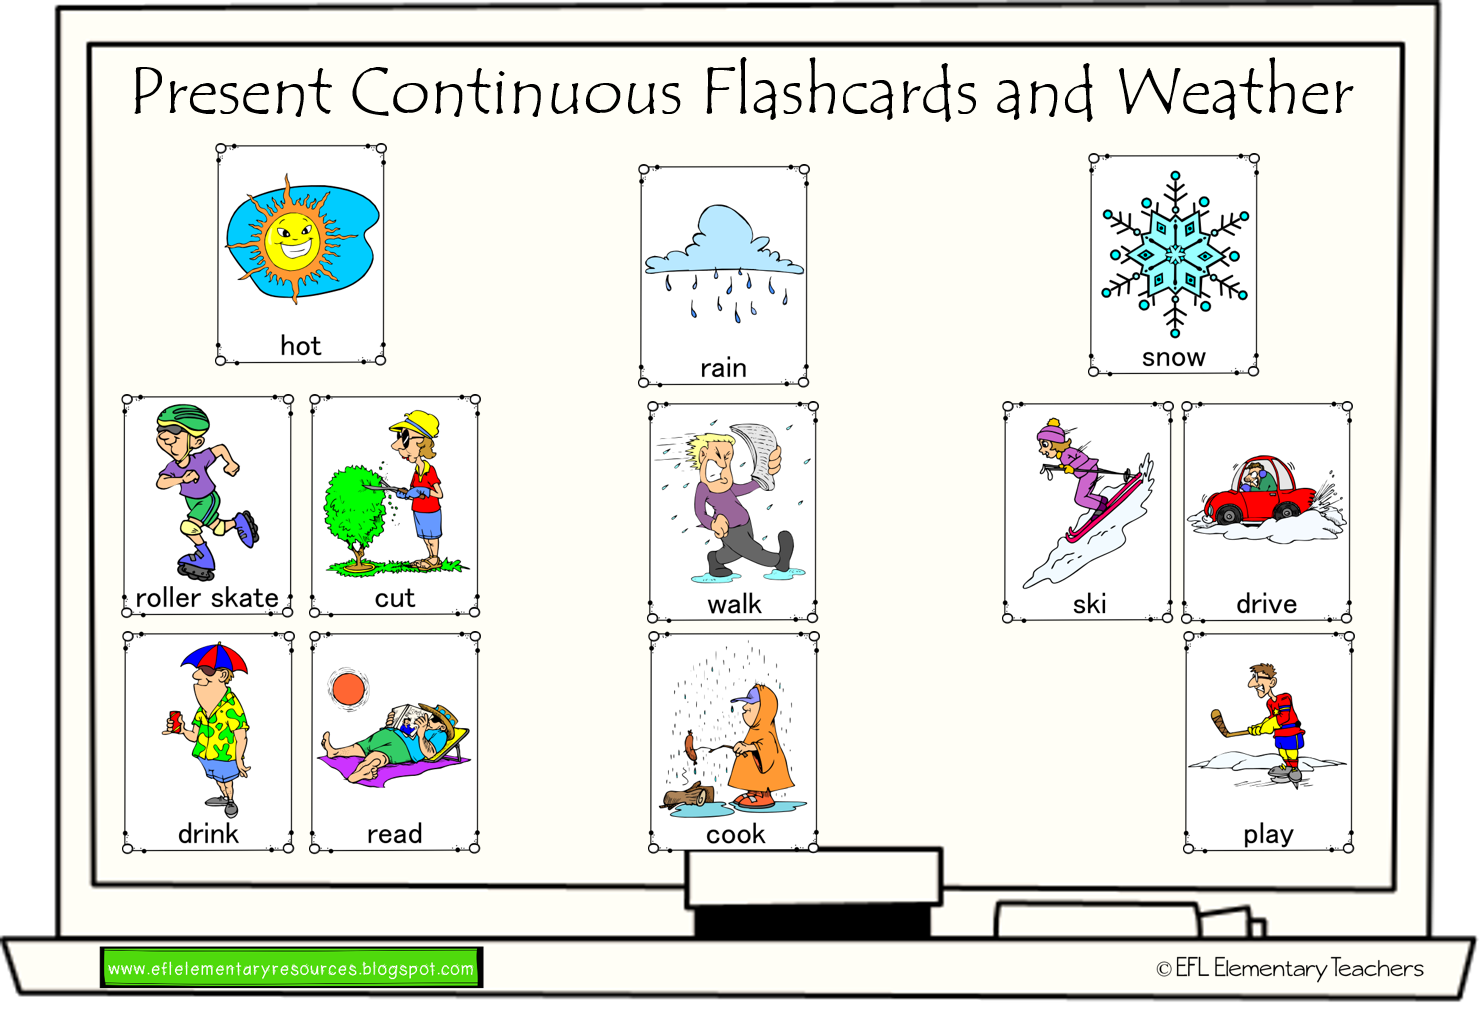 Past Continuous картинки для описания. Present Continuous. Present Continuous игра. Present simple present Continuous картинки для описания. Present continuous weather